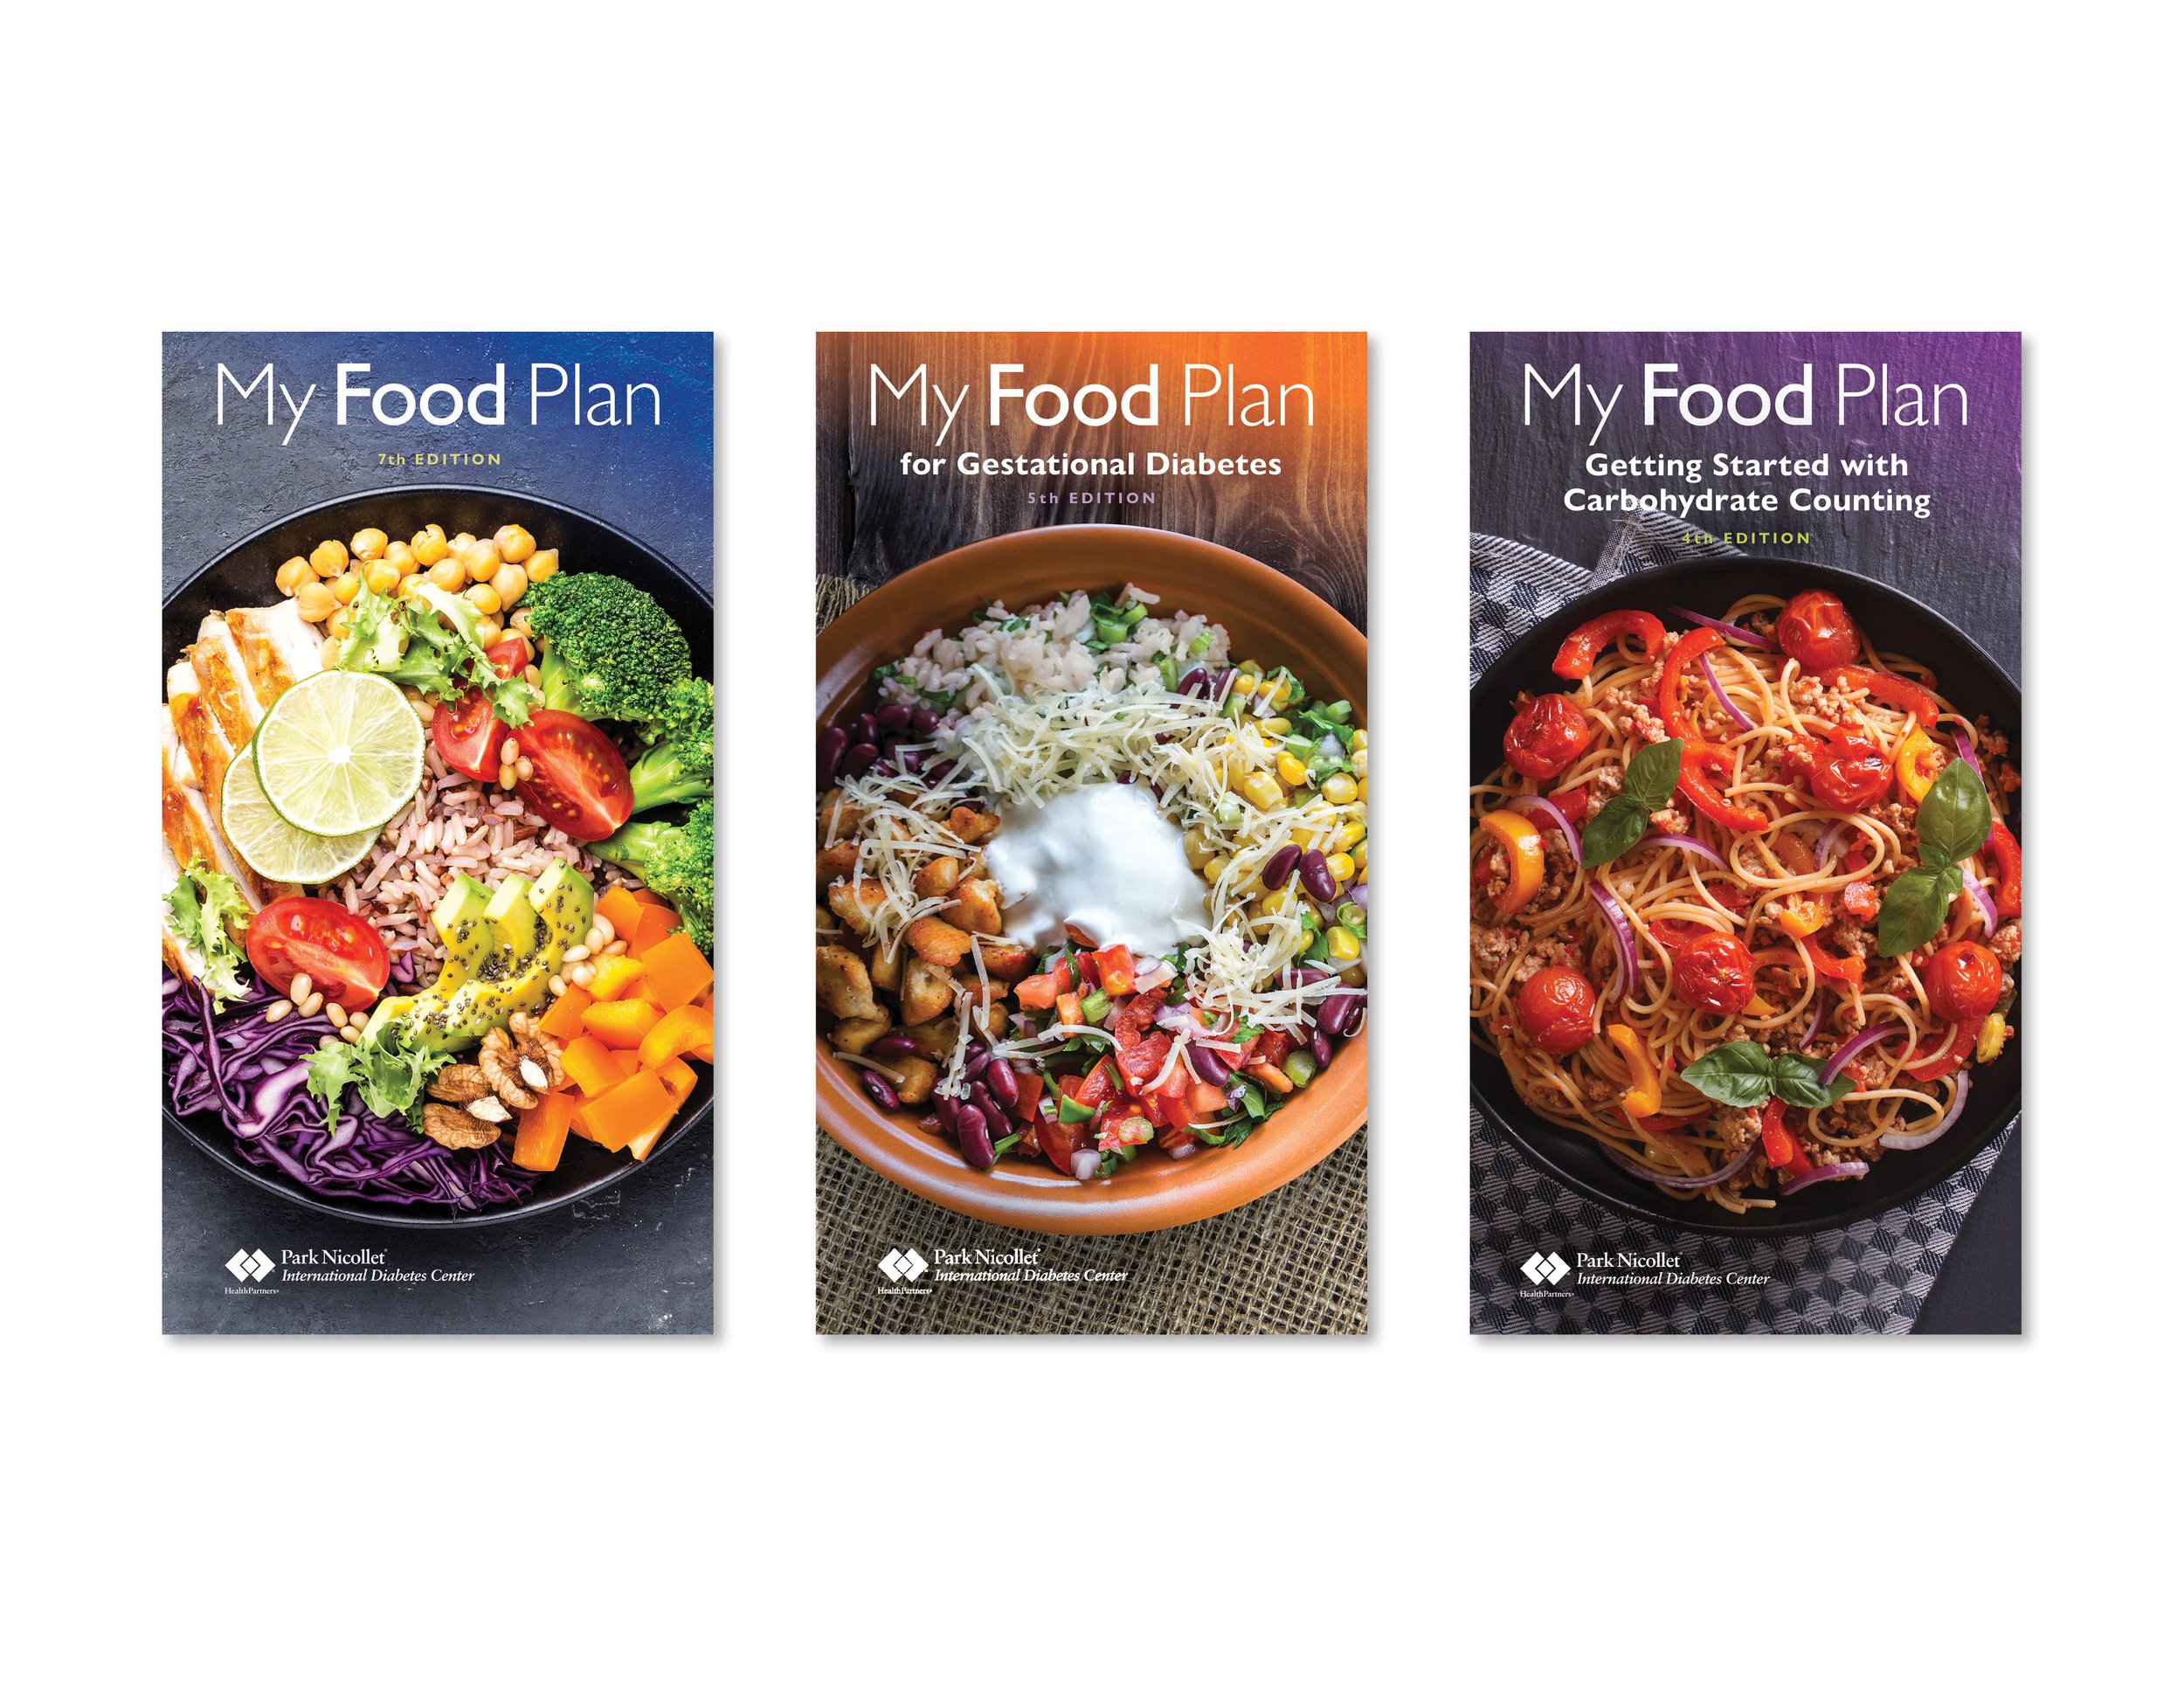   My Food Plan  brochure covers developed by the International Diabetes Center and HealthPartners 